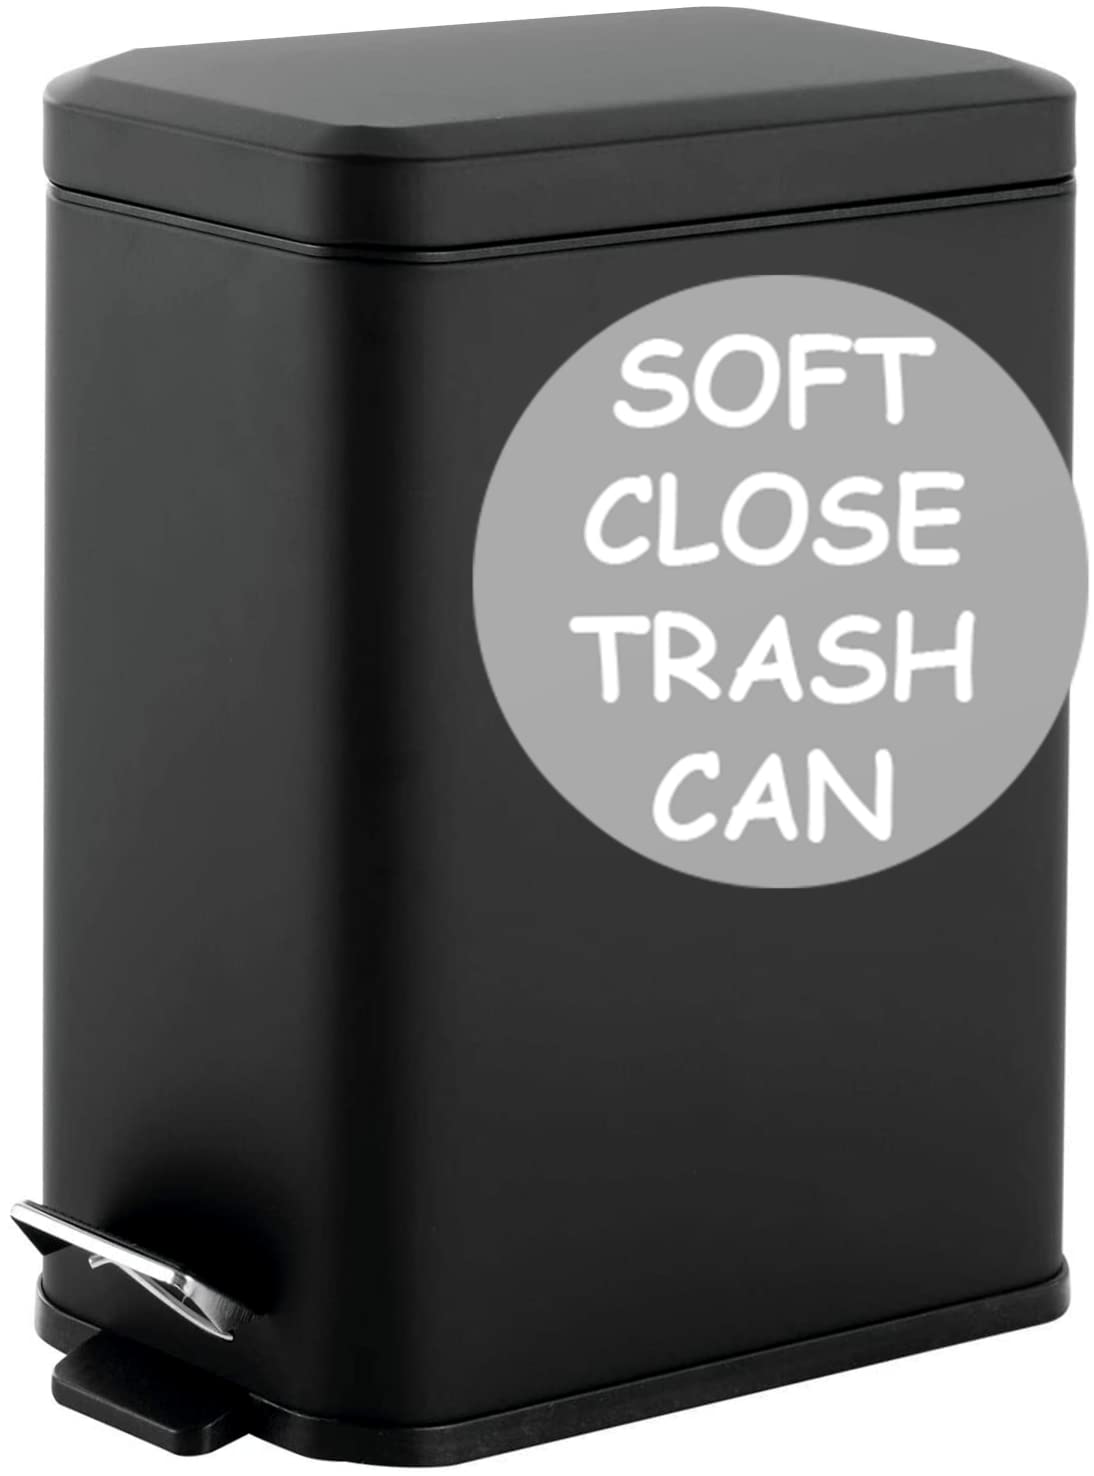 Homie Soft Close, Slim Trash Can 2.6 Gallon with Anti - Bag Slip Liner and Lid, Use As Mini Garbage Basket, Slim Dust Bin, or Decor in Bathroom